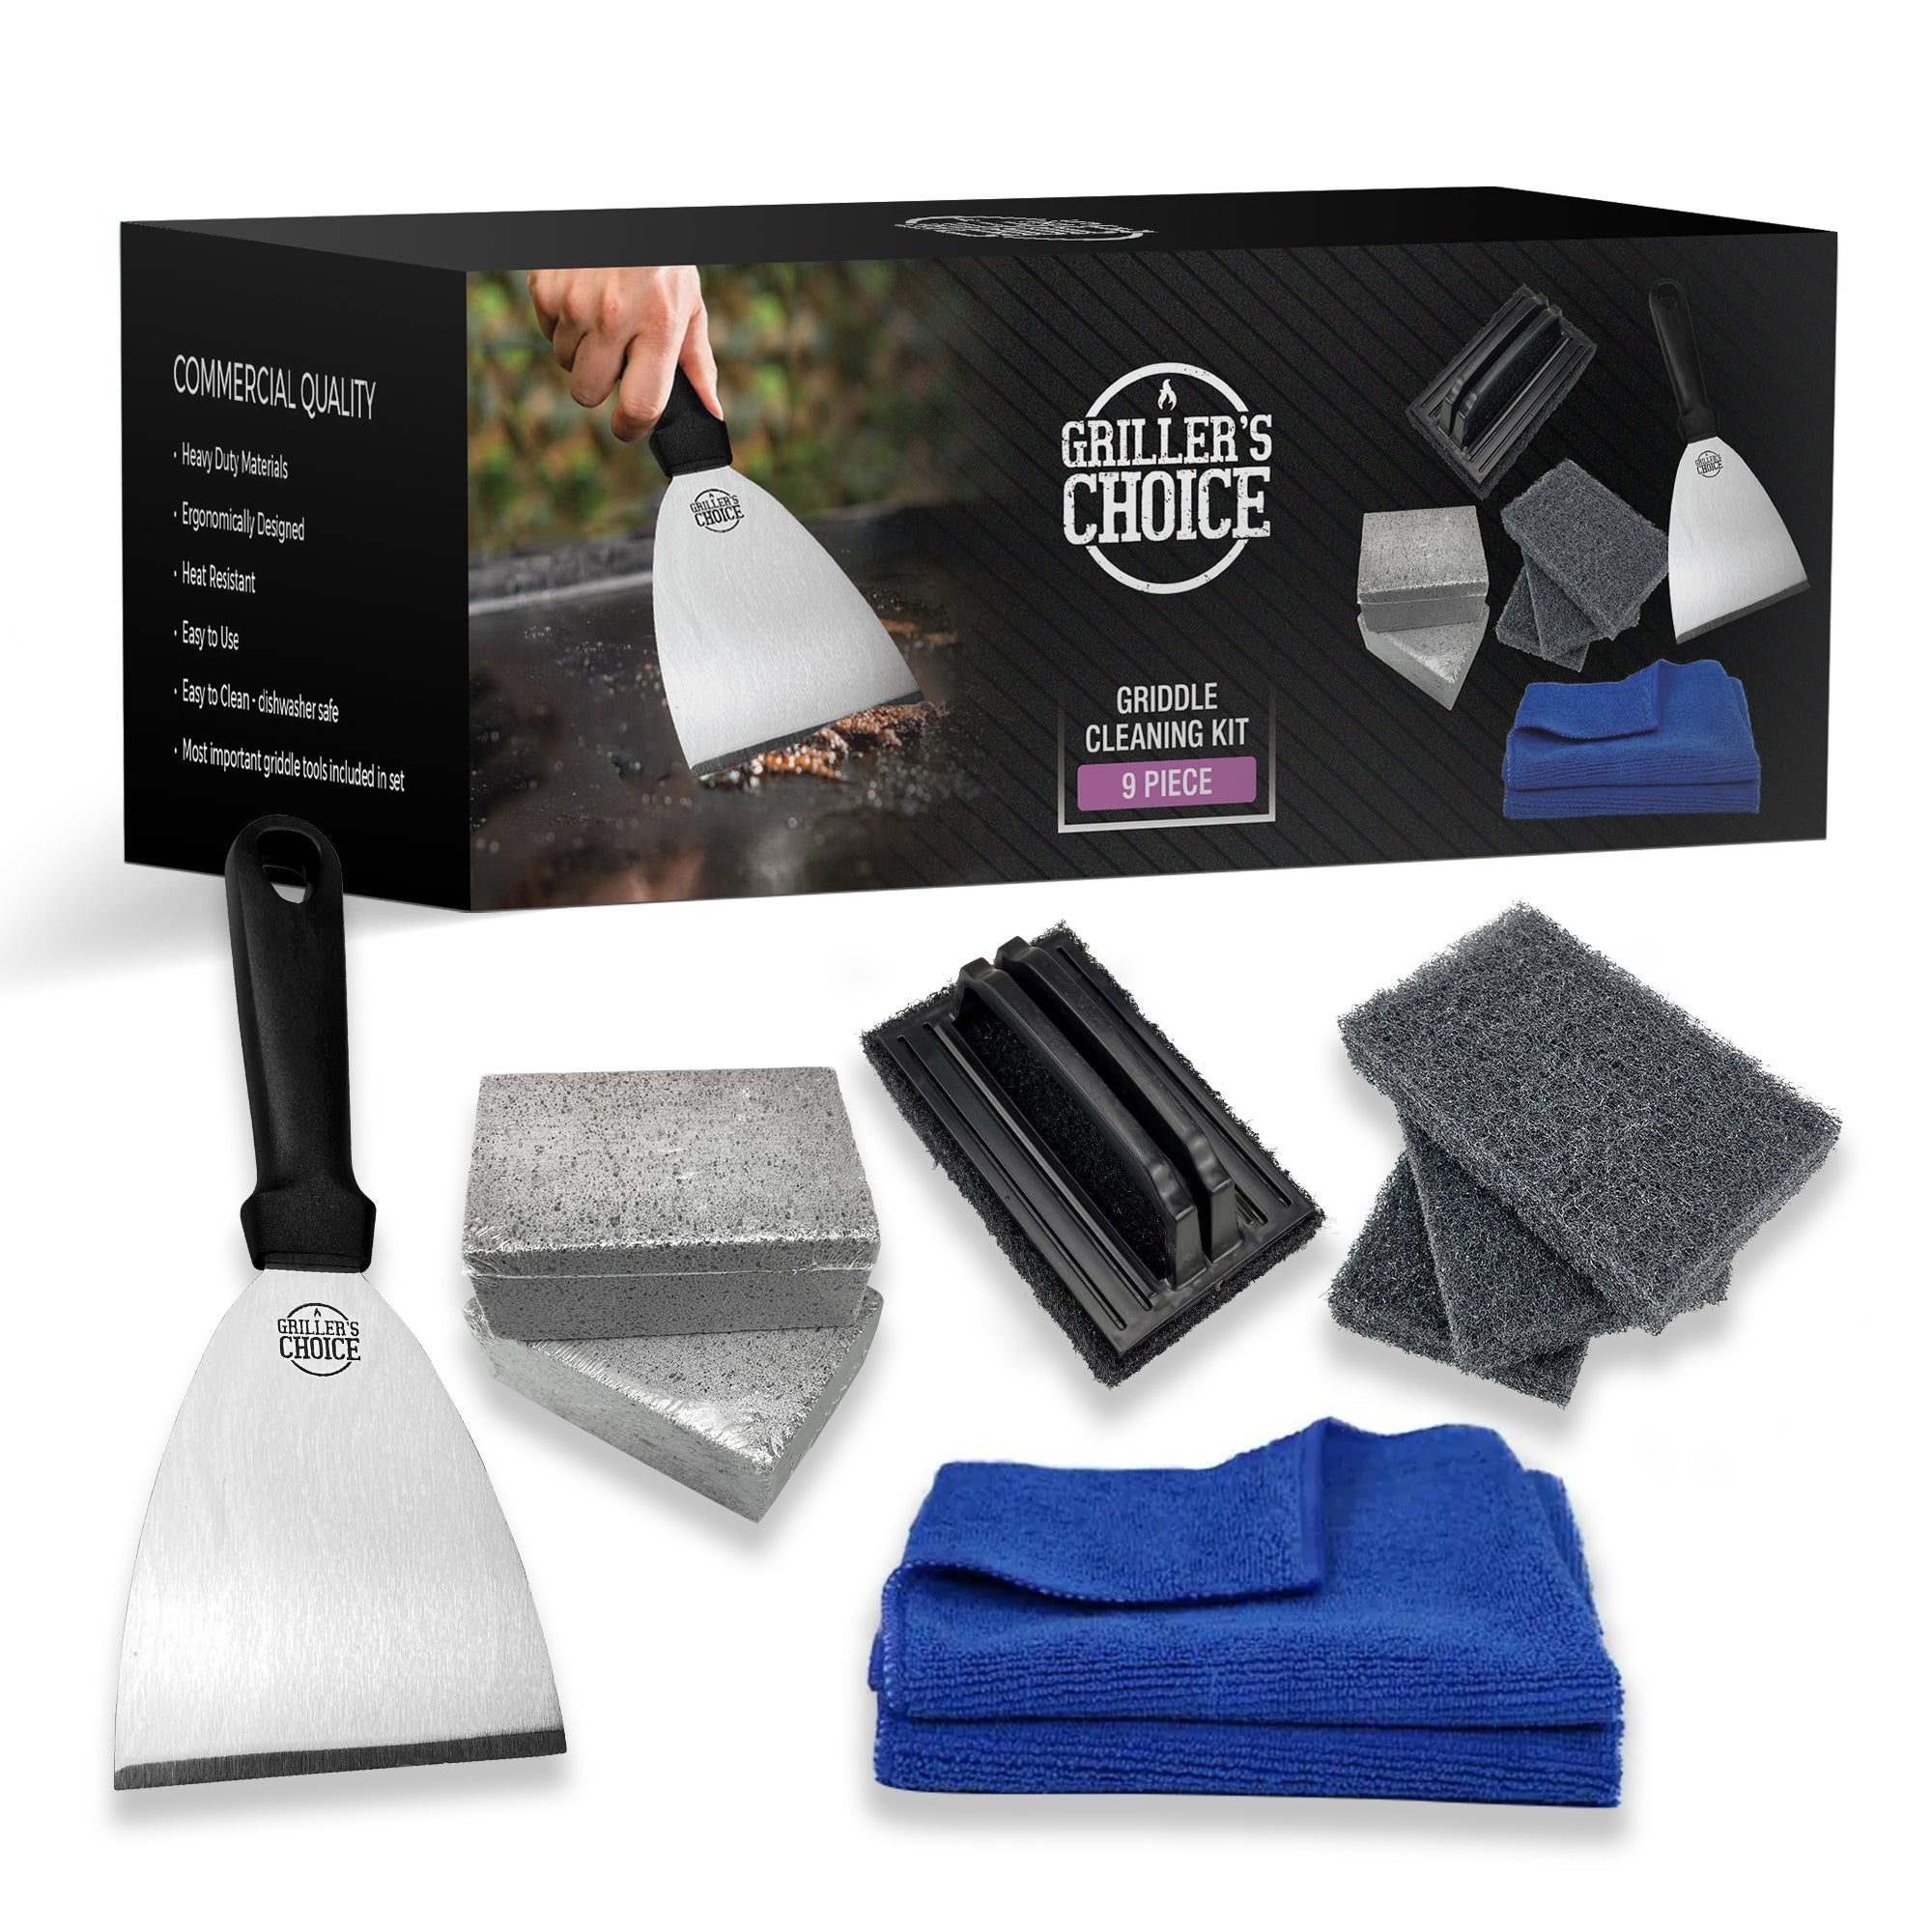 Versatility Griddle Cleaning Kit Grill Cleaner Tool Set For Hot Or